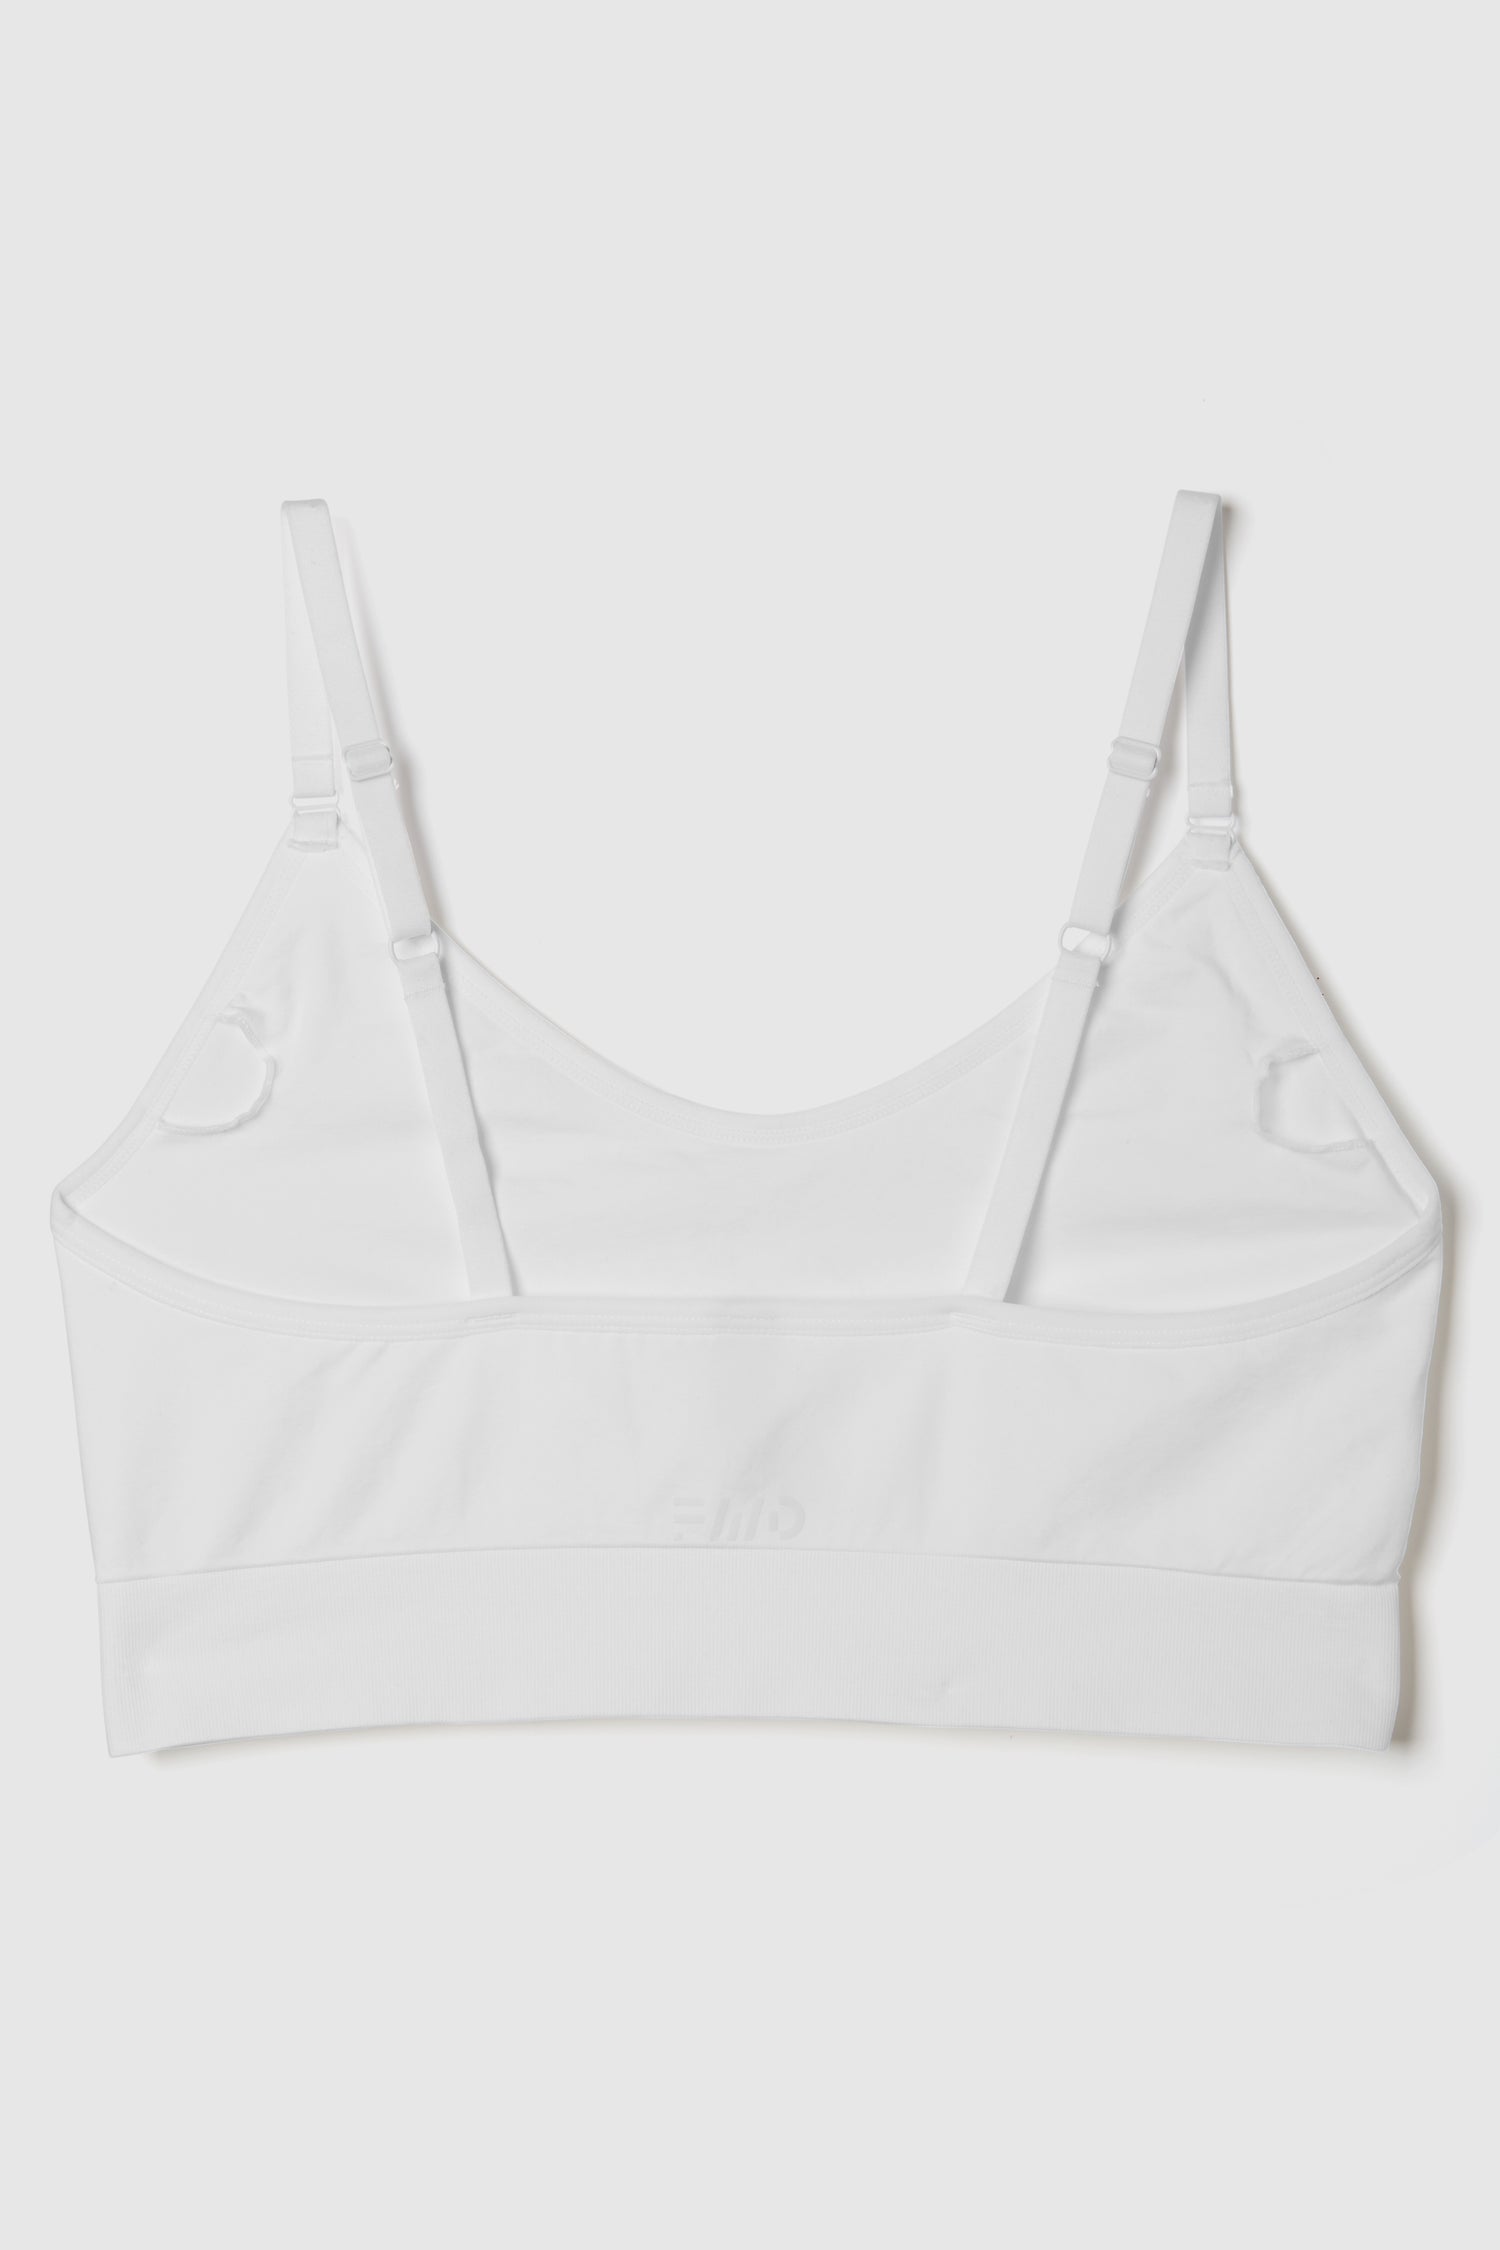 FWD Women's Seamless Sports Bra, Low Impact, Removable Pads - BEST SELLING